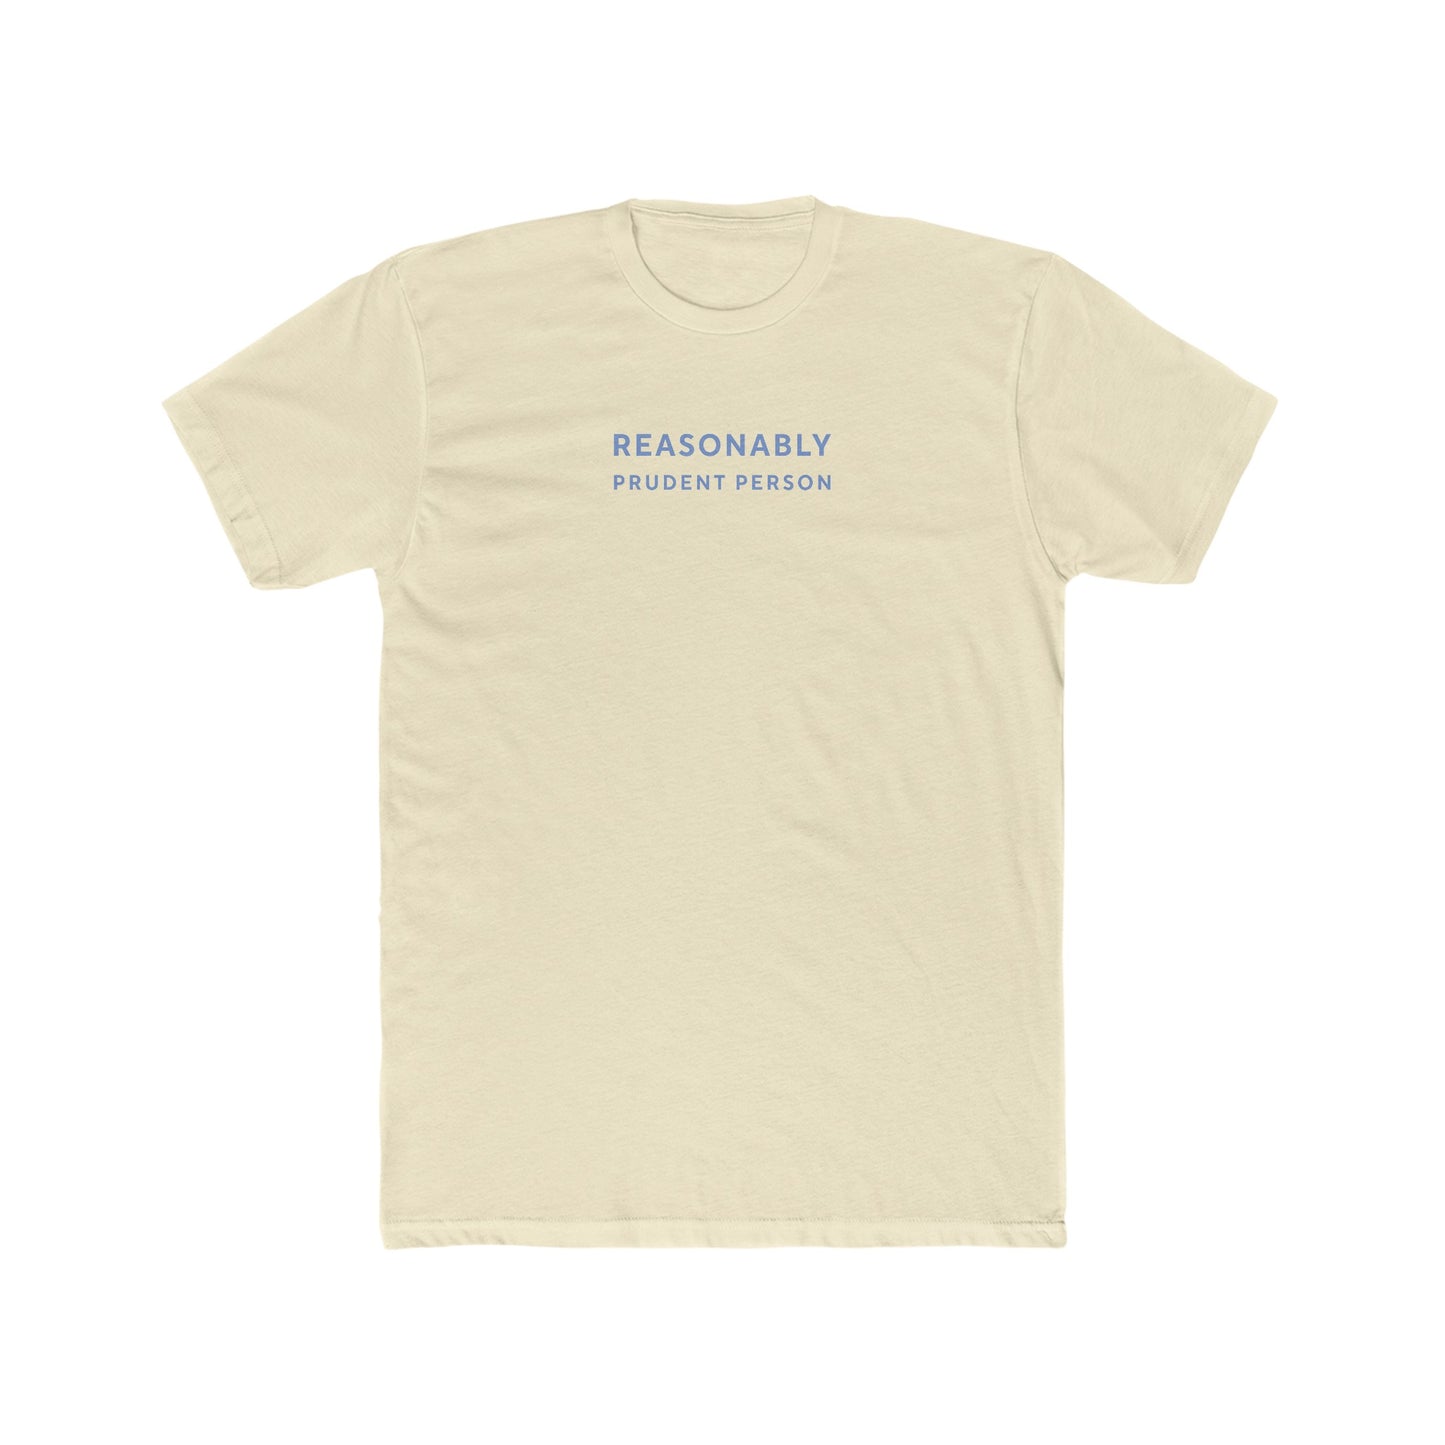 Reasonably Prudent Person Tee